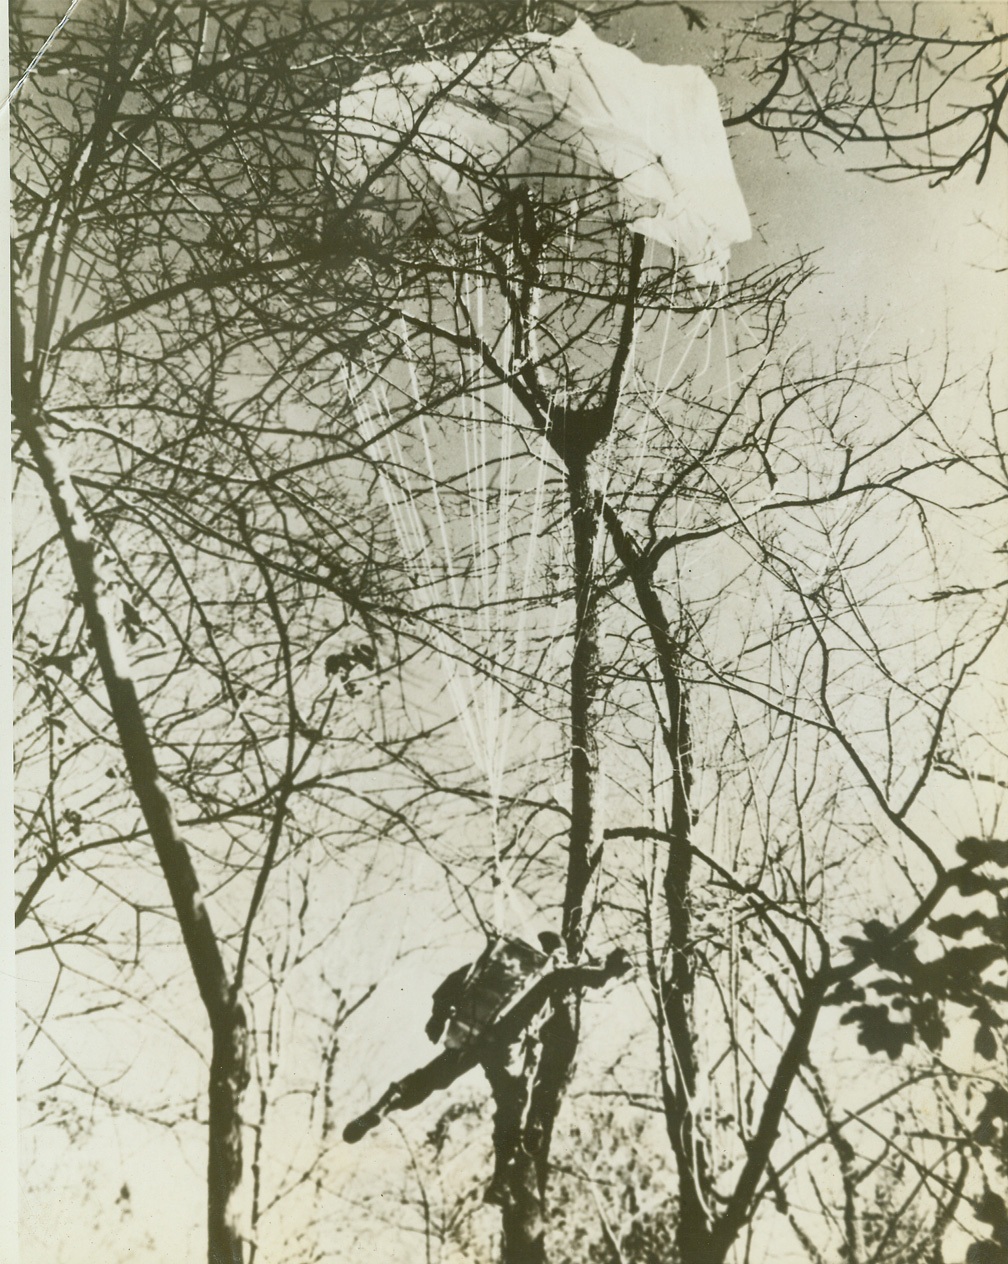 Unhappy Landing, 5/6/1942. New River, N.C.—Here’s the unhappy landing in a tree of a paramarine—Sgt. Roland F. Kachinski of Chicago—during maneuvers of the 1st Parachute Battalion of the U.S. Marine Corps at this extensive training base. Like all paramarines, the sergeant is trained to step out of a plane at an extremely low altitude; to fight with fist, knee, knife or gun. Credit: U.S. Marine Corps photo, ACME.;